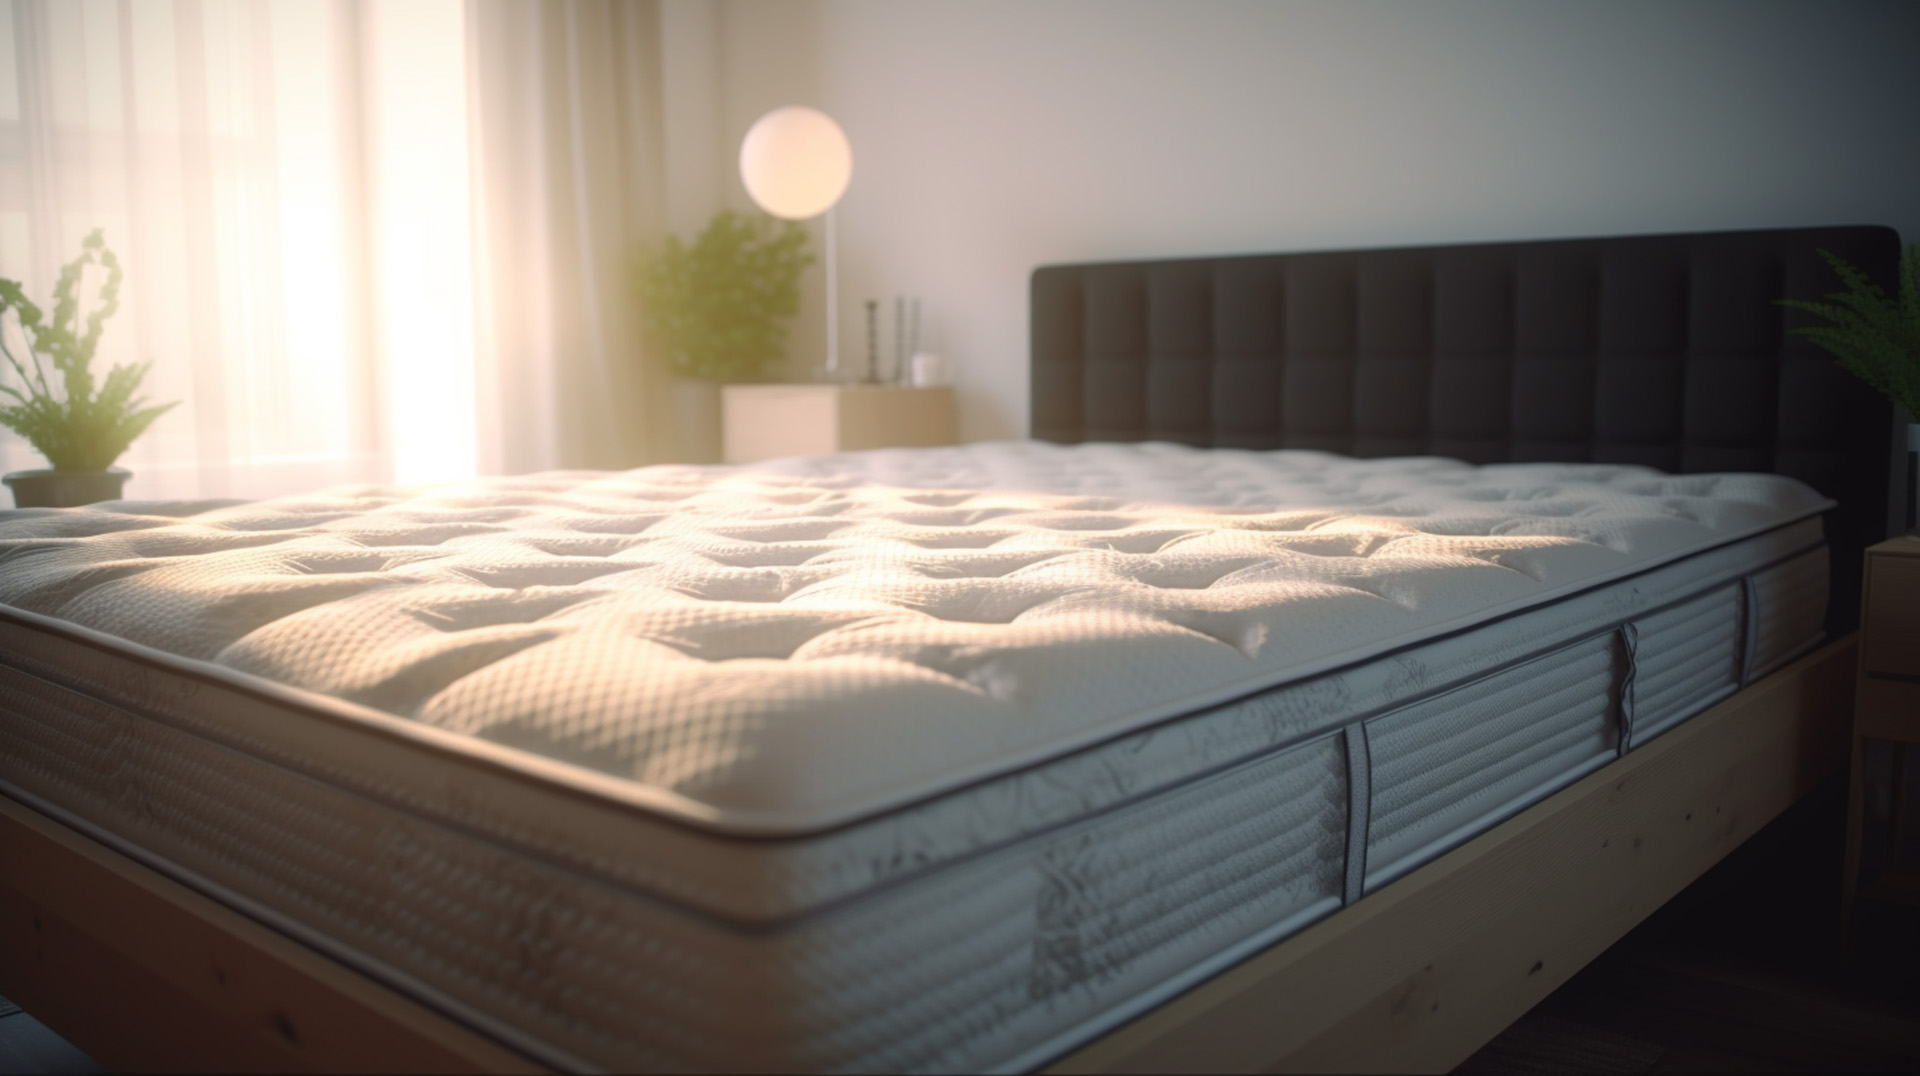 Shop Organic Mattresses and Beds in Fairfield, CT